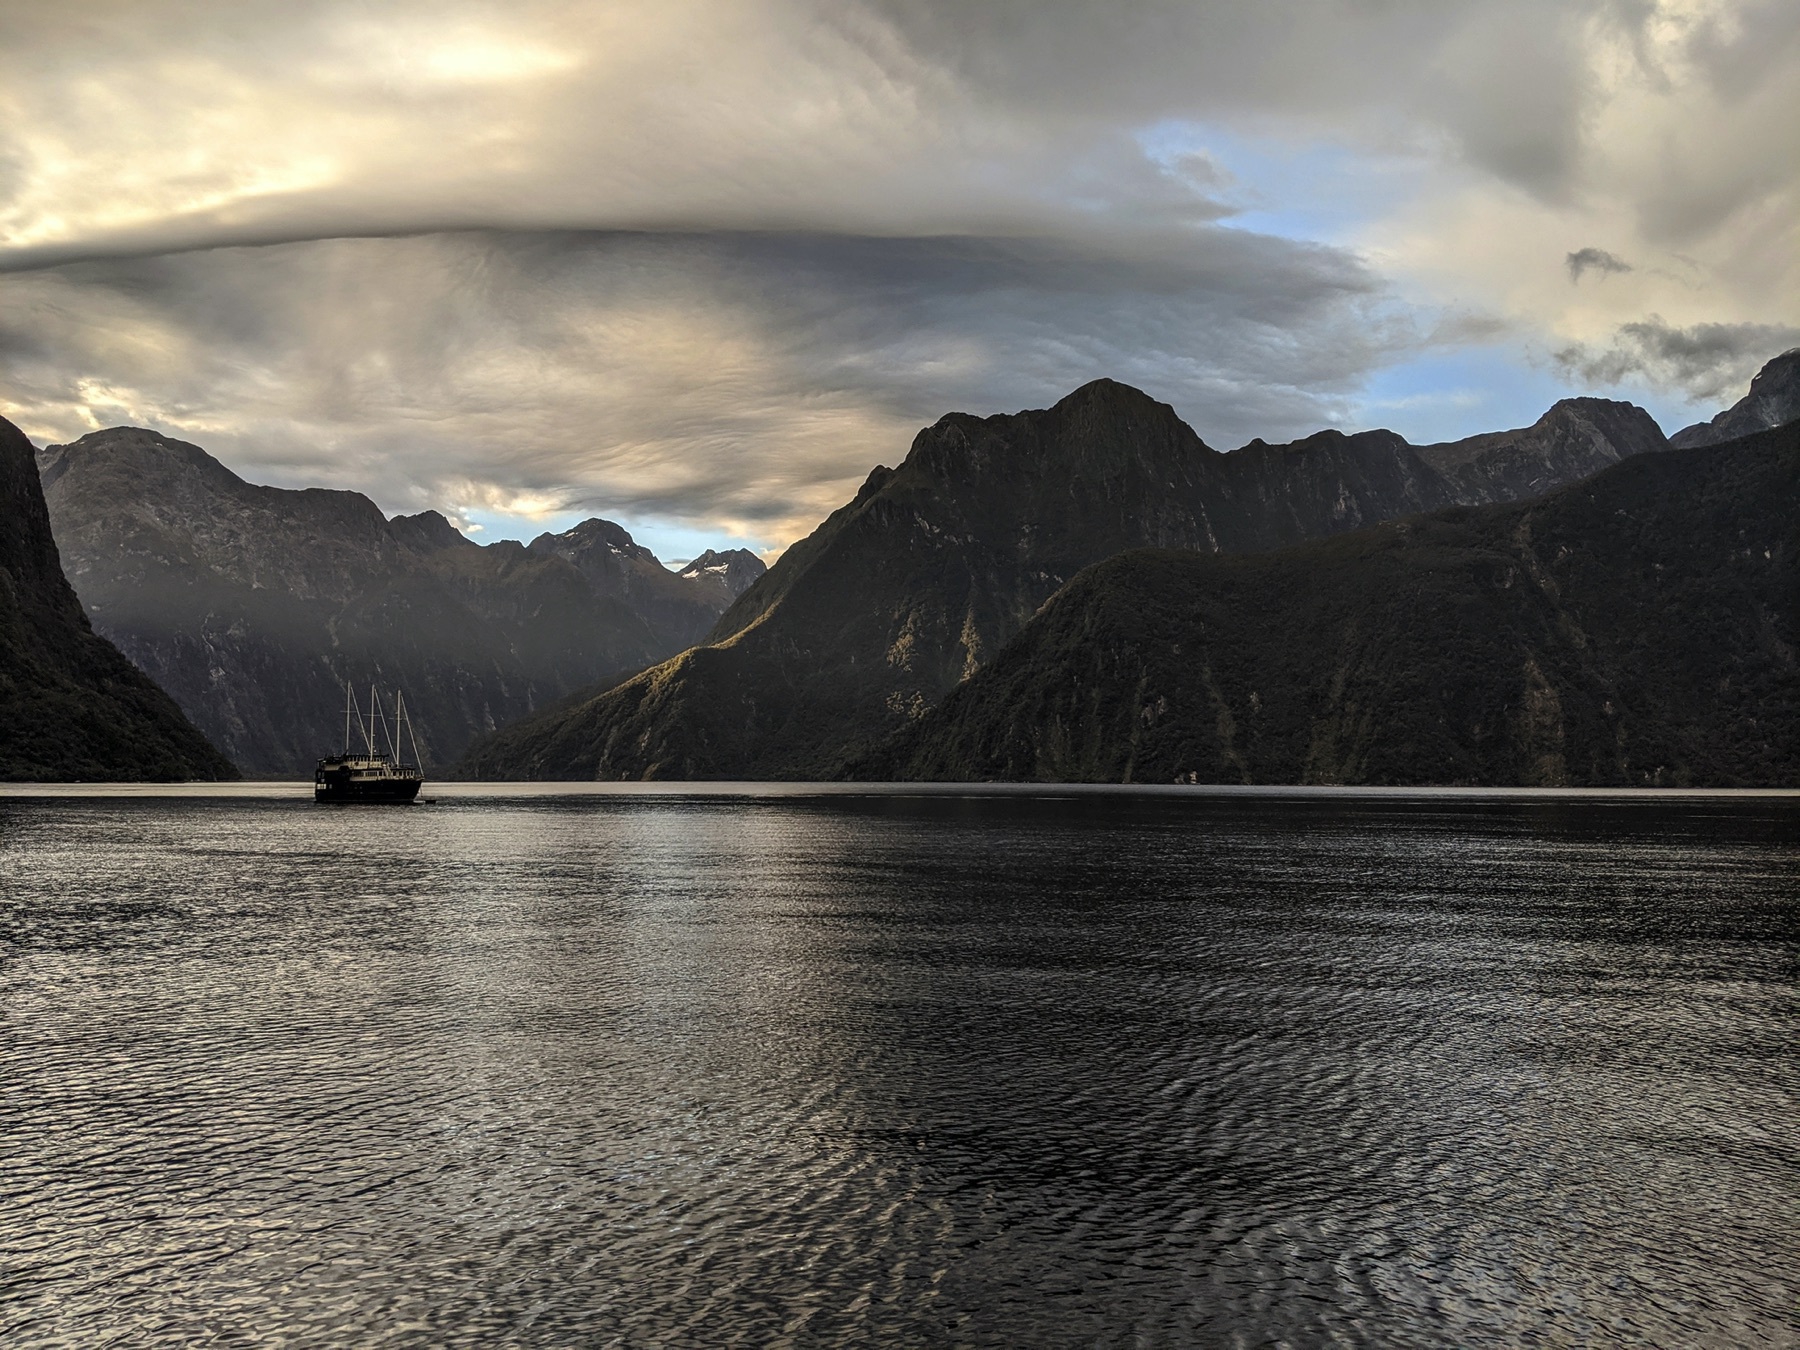 Image a boat at sunrise on Piopiotahi (Milford Sound) in New Zealand’s South Island.